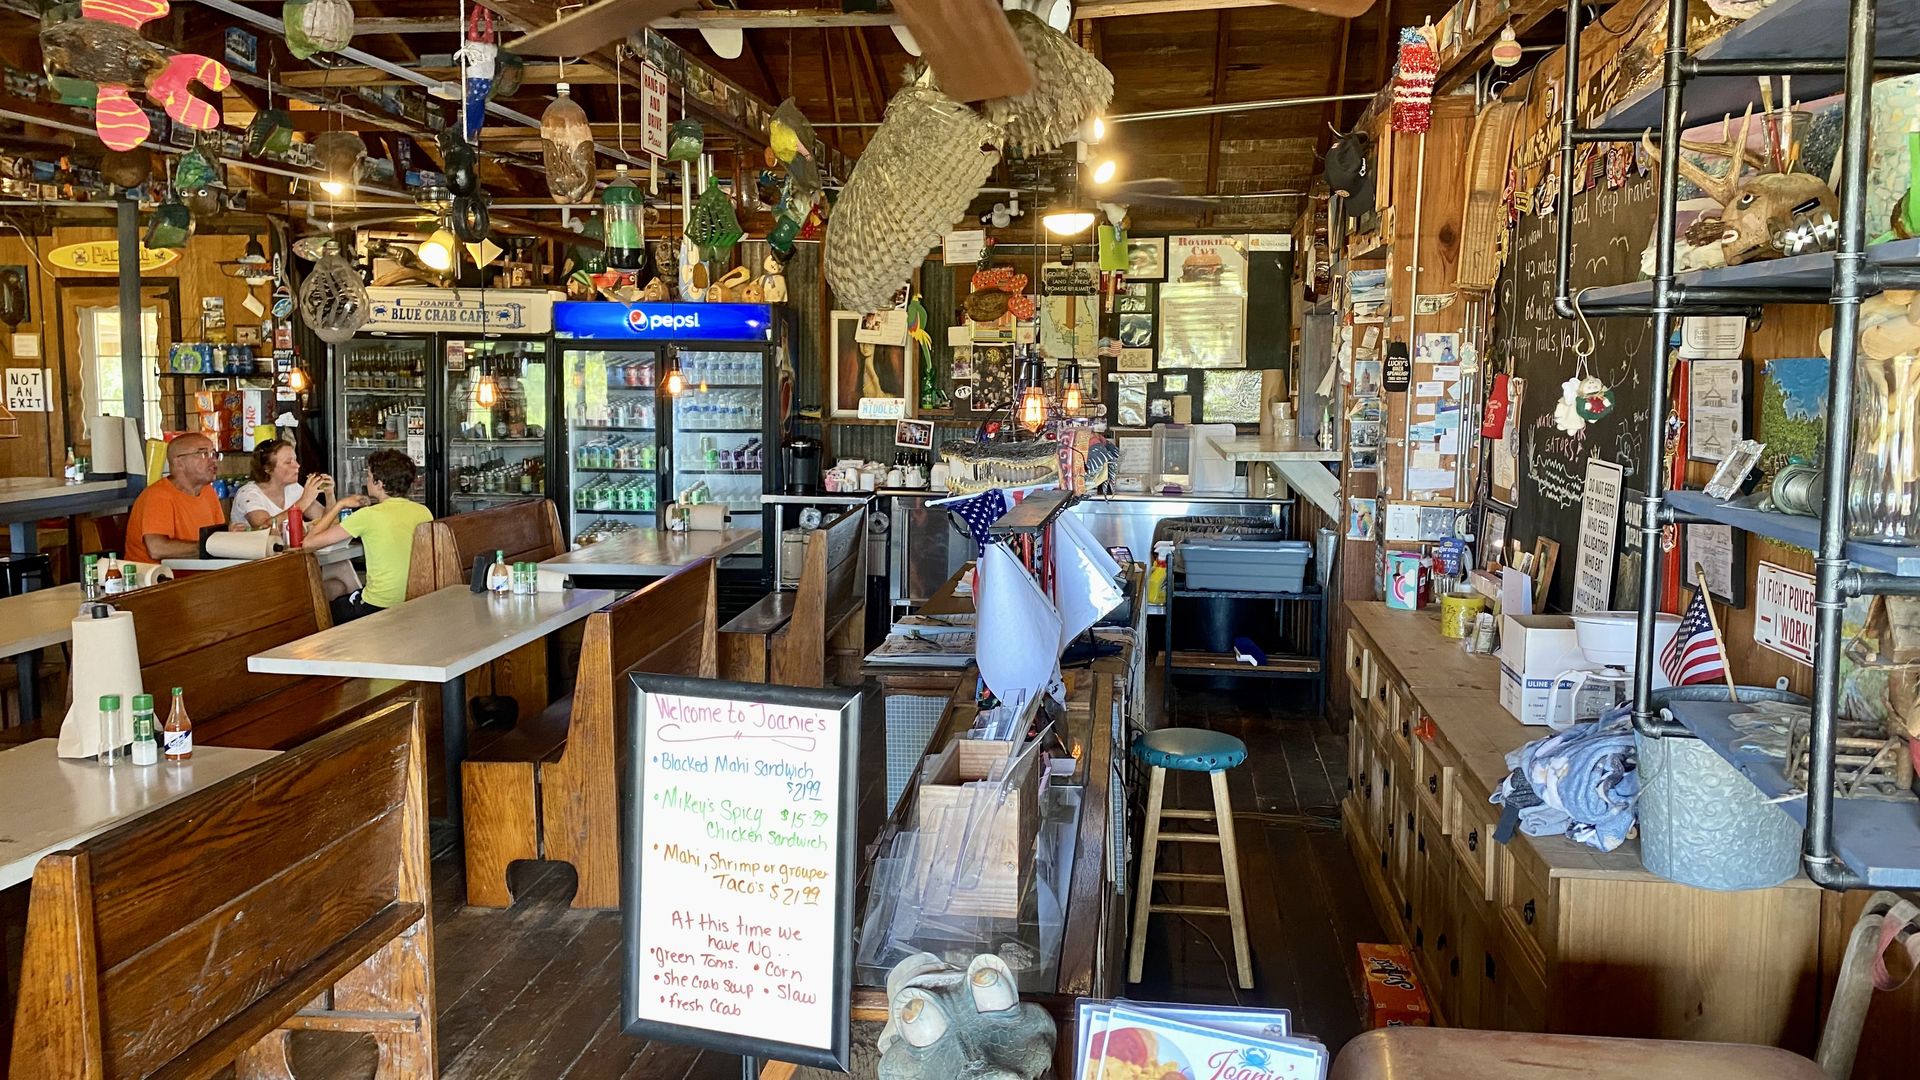 The inside of Joanie's Blue Crab Cafe.